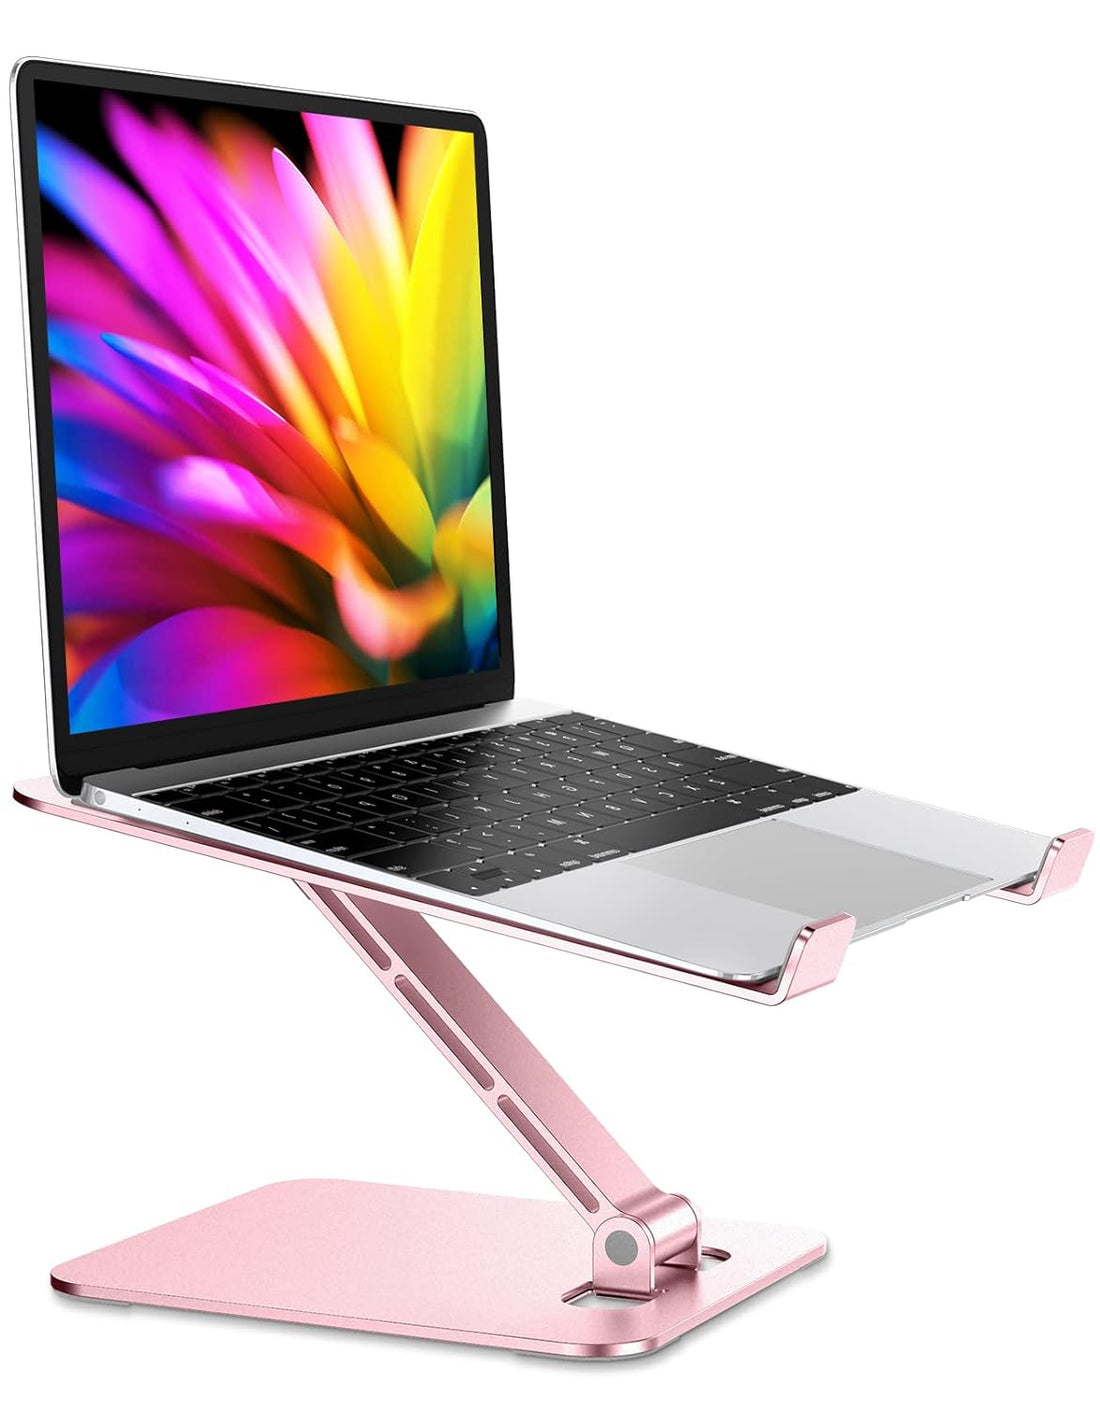 RIWUCT Foldable Laptop Stand, Height Adjustable Ergonomic Computer Stand for Desk, Ventilated Aluminum Portable Laptop Riser Holder Compatible with MacBook Pro Air, All Notebooks 10-16" (Rose Gold)